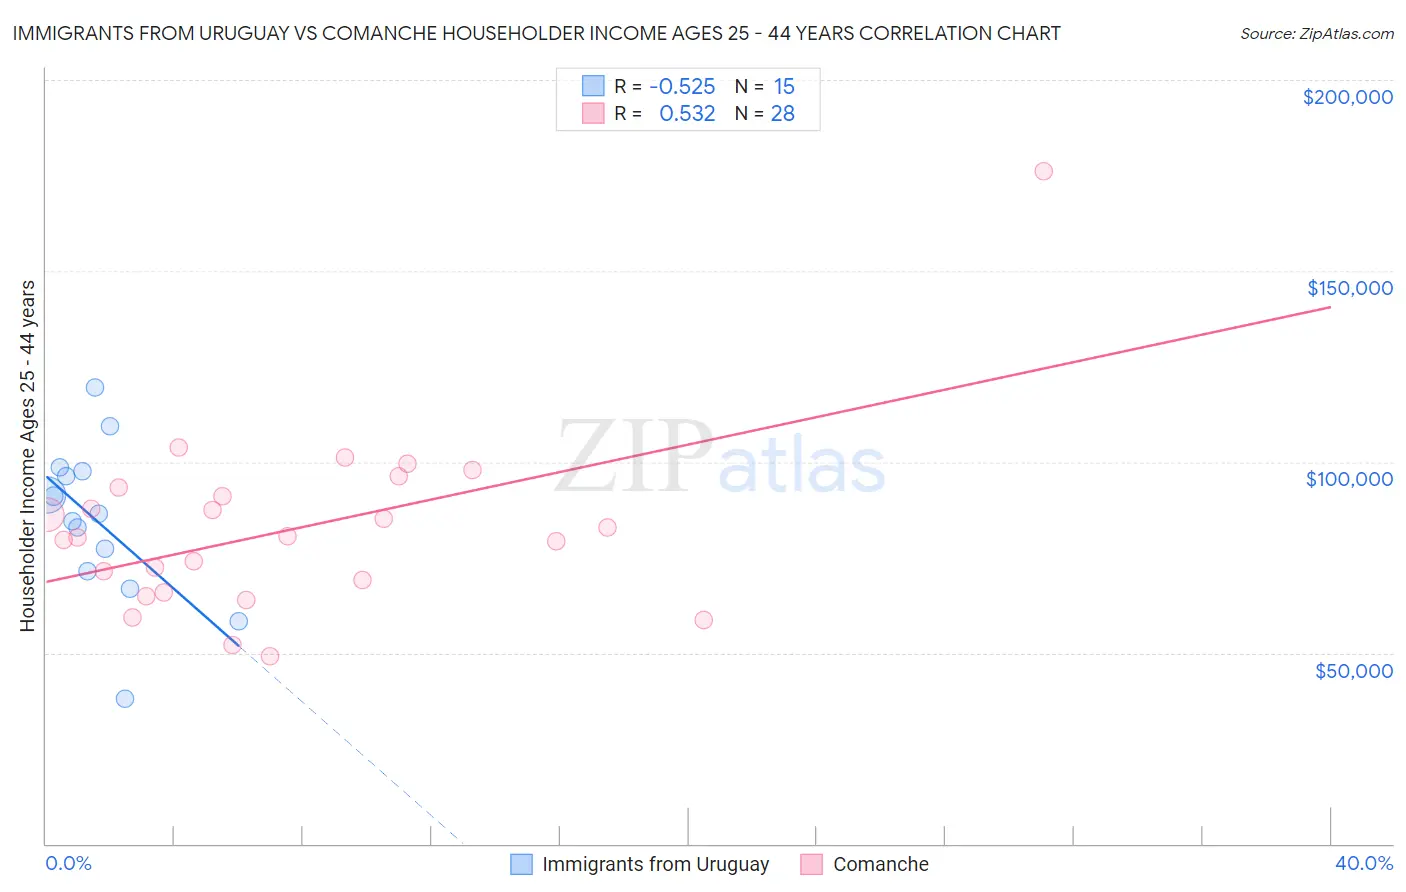 Immigrants from Uruguay vs Comanche Householder Income Ages 25 - 44 years